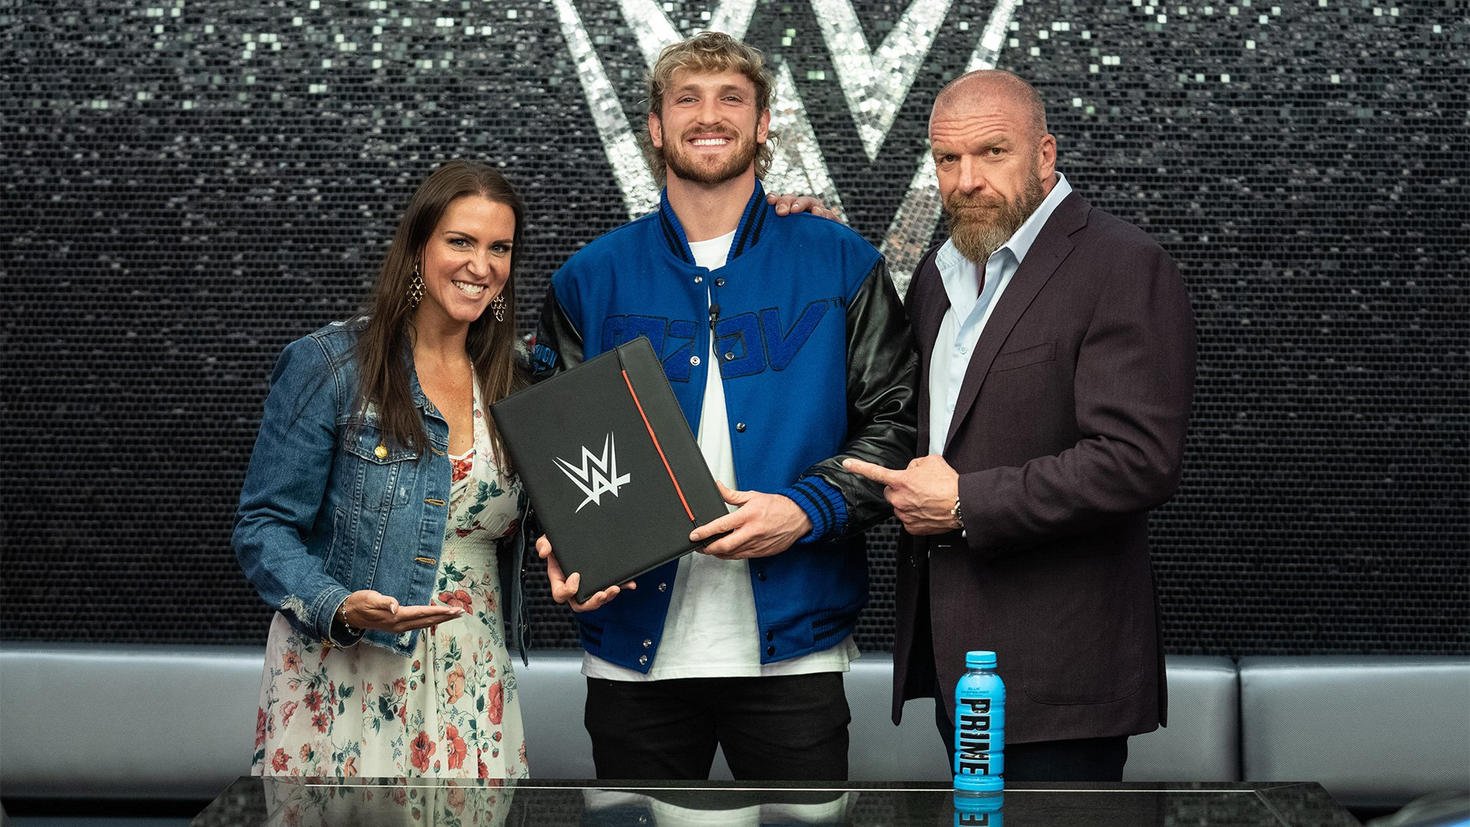 Social media star Logan Paul signs pro wrestling deal with WWE